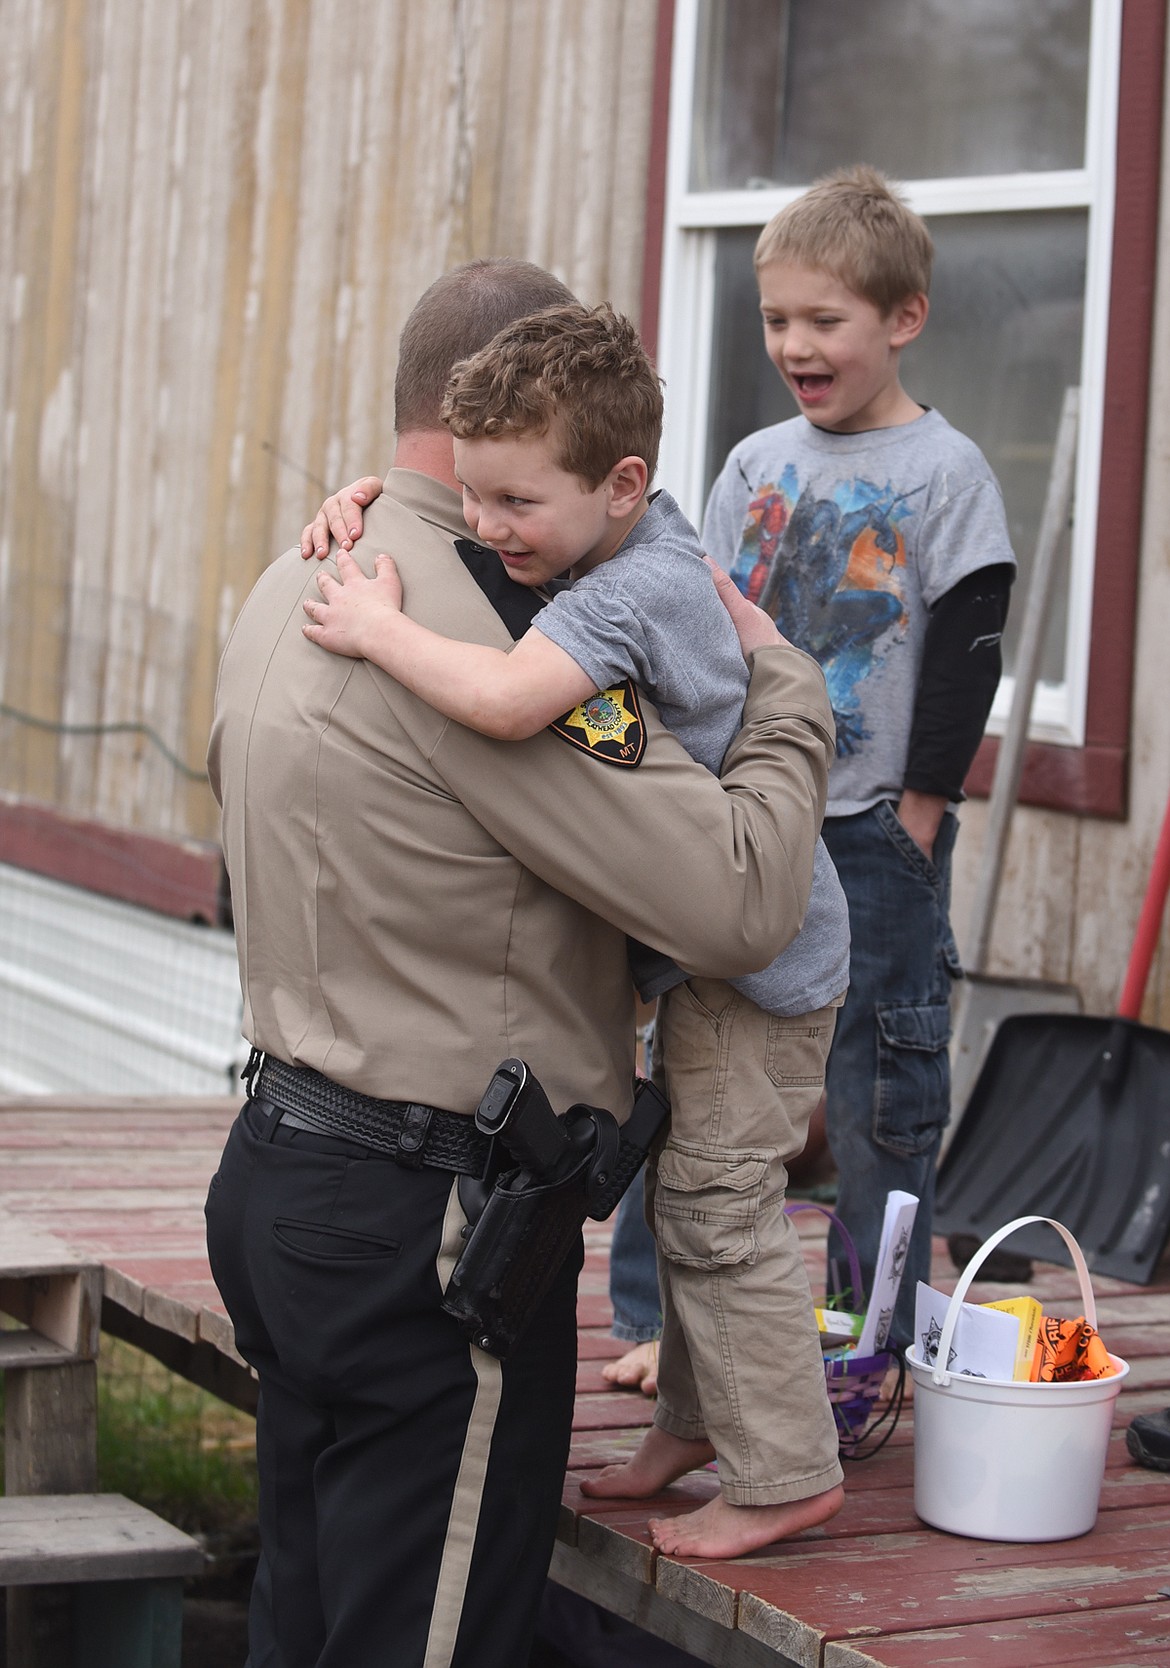 Flathead County Sheriff Brian Heino gets a hug from Elliott Rush after he delivered Easter baskets to Rush and Jacob Harper Friday. (Scott Shindledecker/Daily Inter Lake)